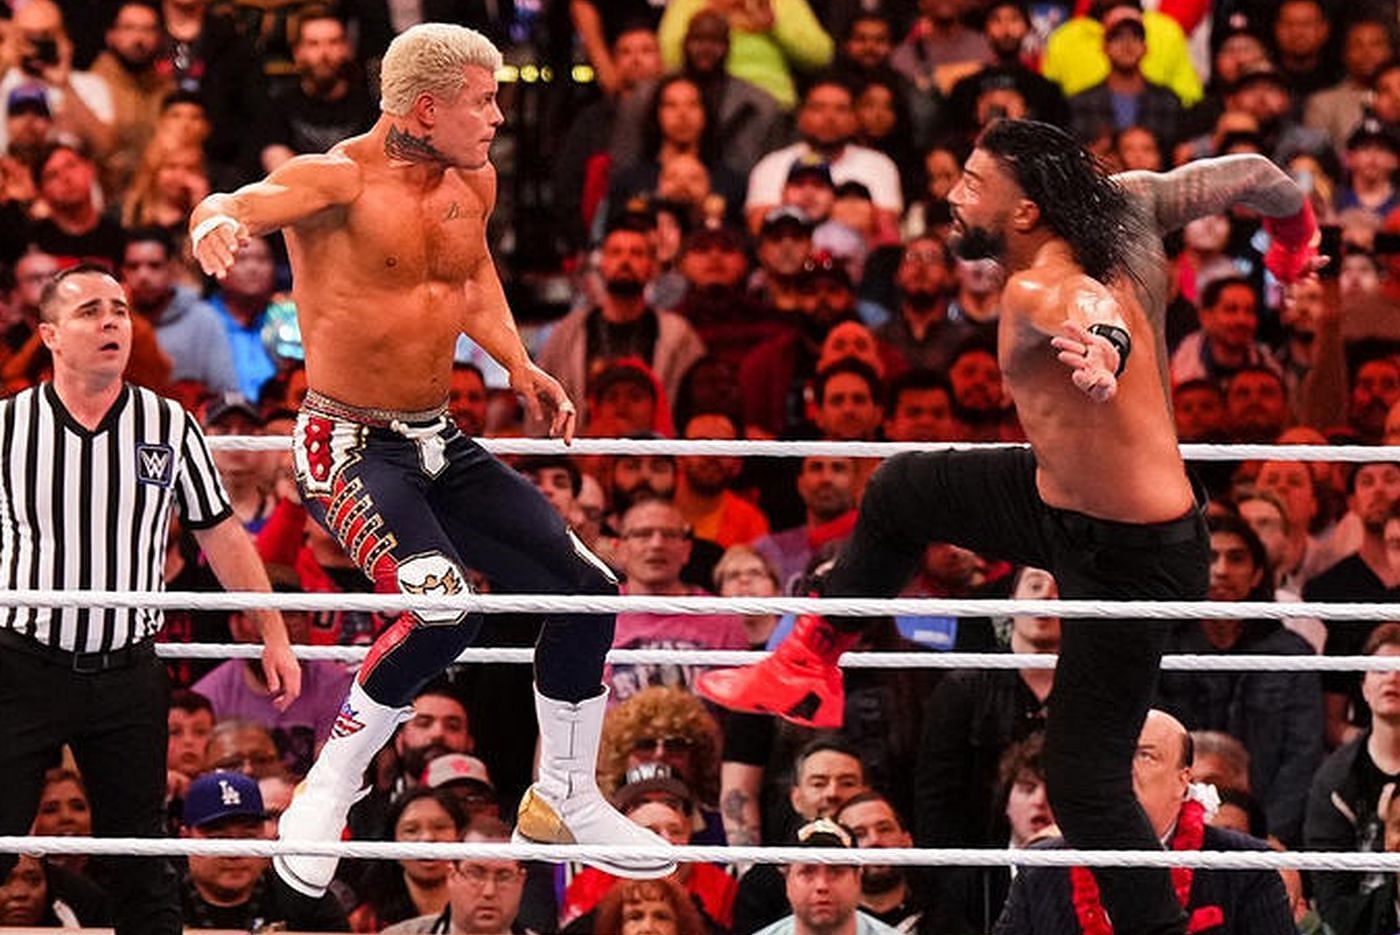 The American Nightmare tried to finish his story on Night 2 of WrestleMania 39